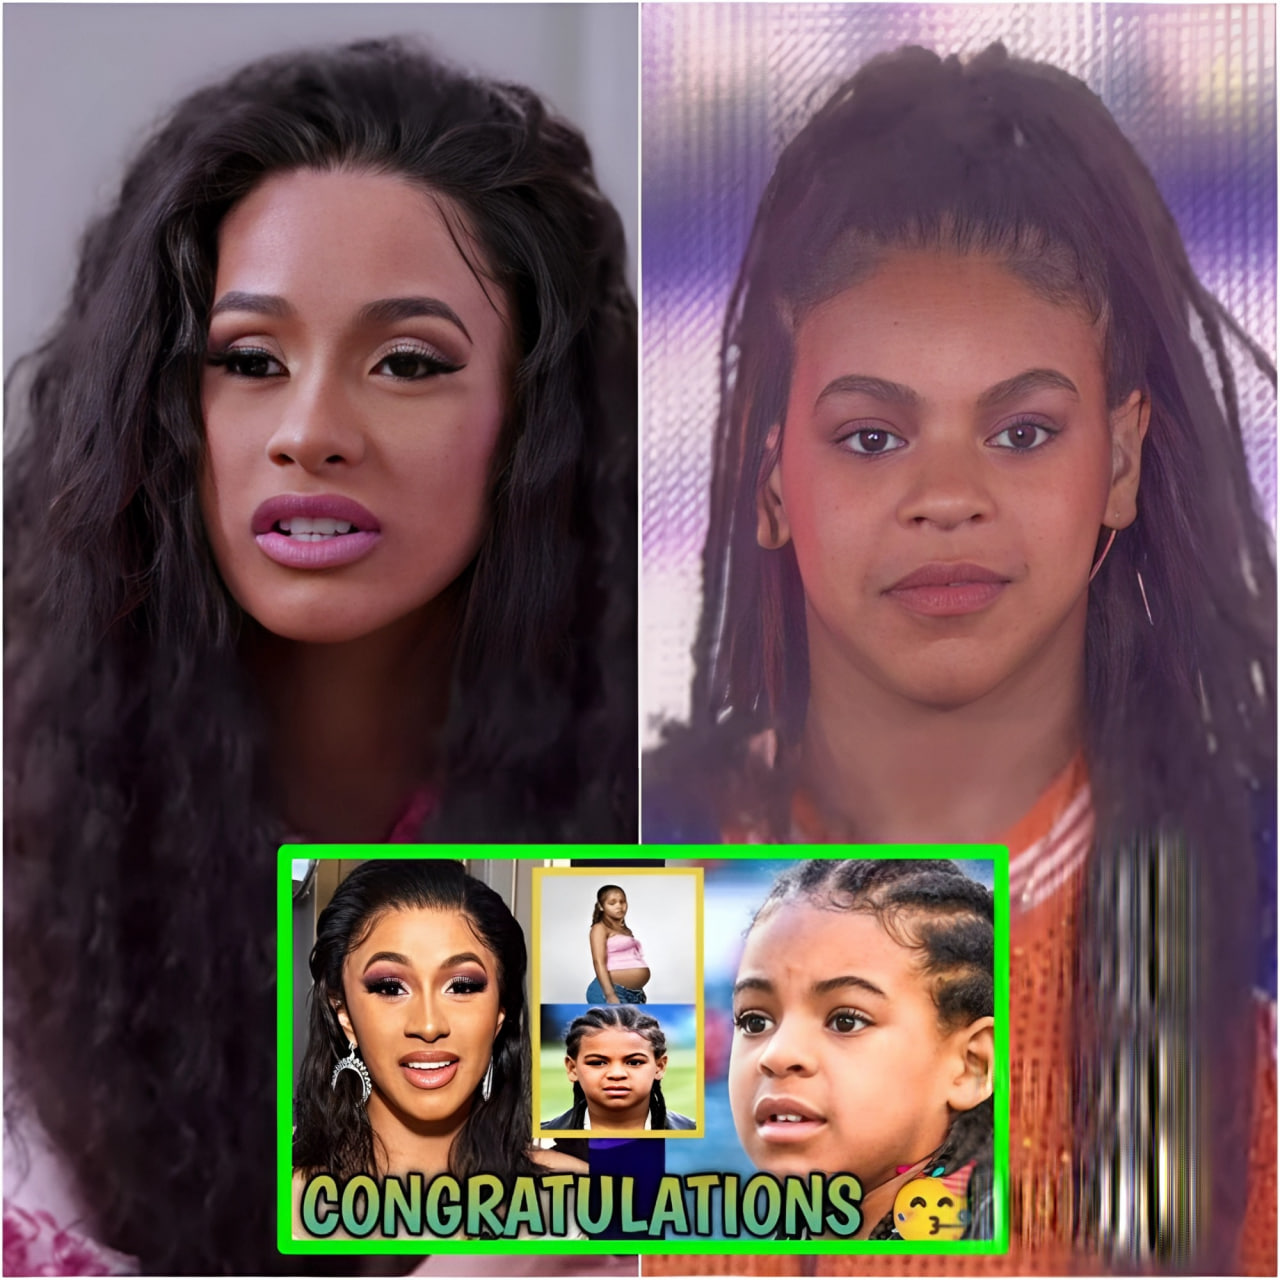 “Blue Ivy is pregnant” Cardi b Exposed truth about the pregnancy on live TV show says CONGRATS (VIDEO)…